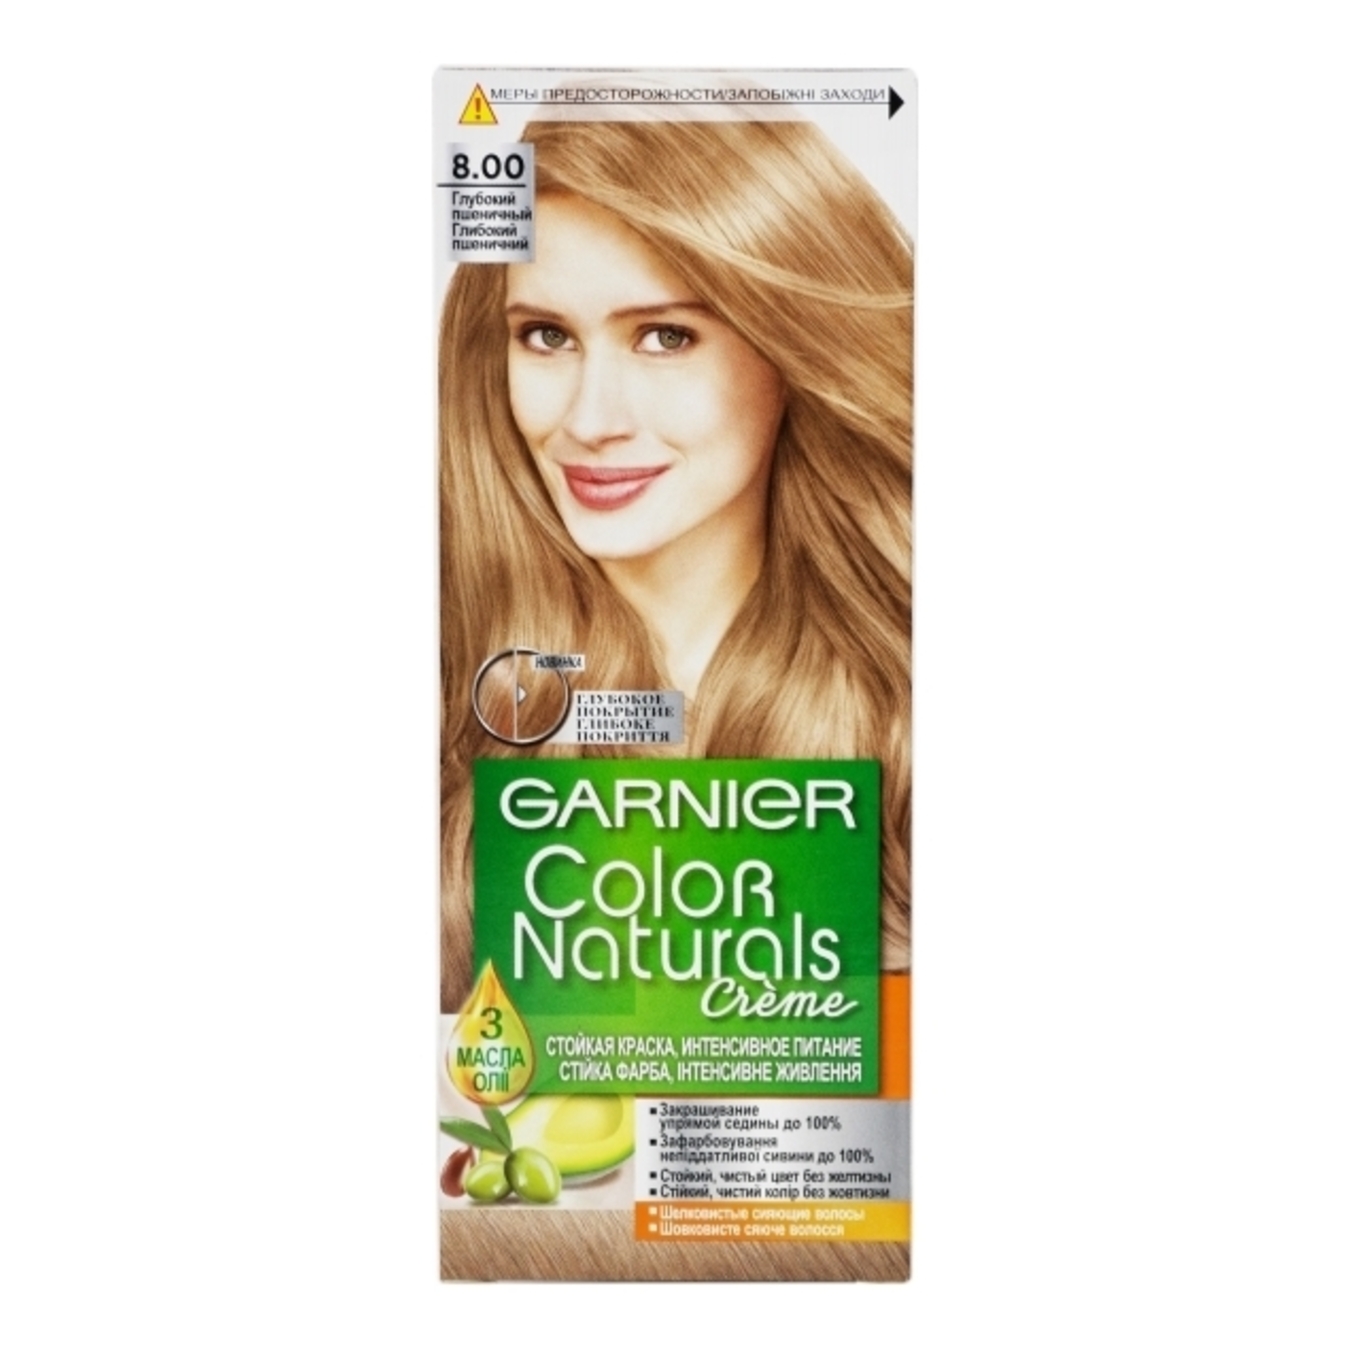 Garnier Color Naturals Creme  Light Blonde Hair Color ᐈ Buy at a good  price from Novus